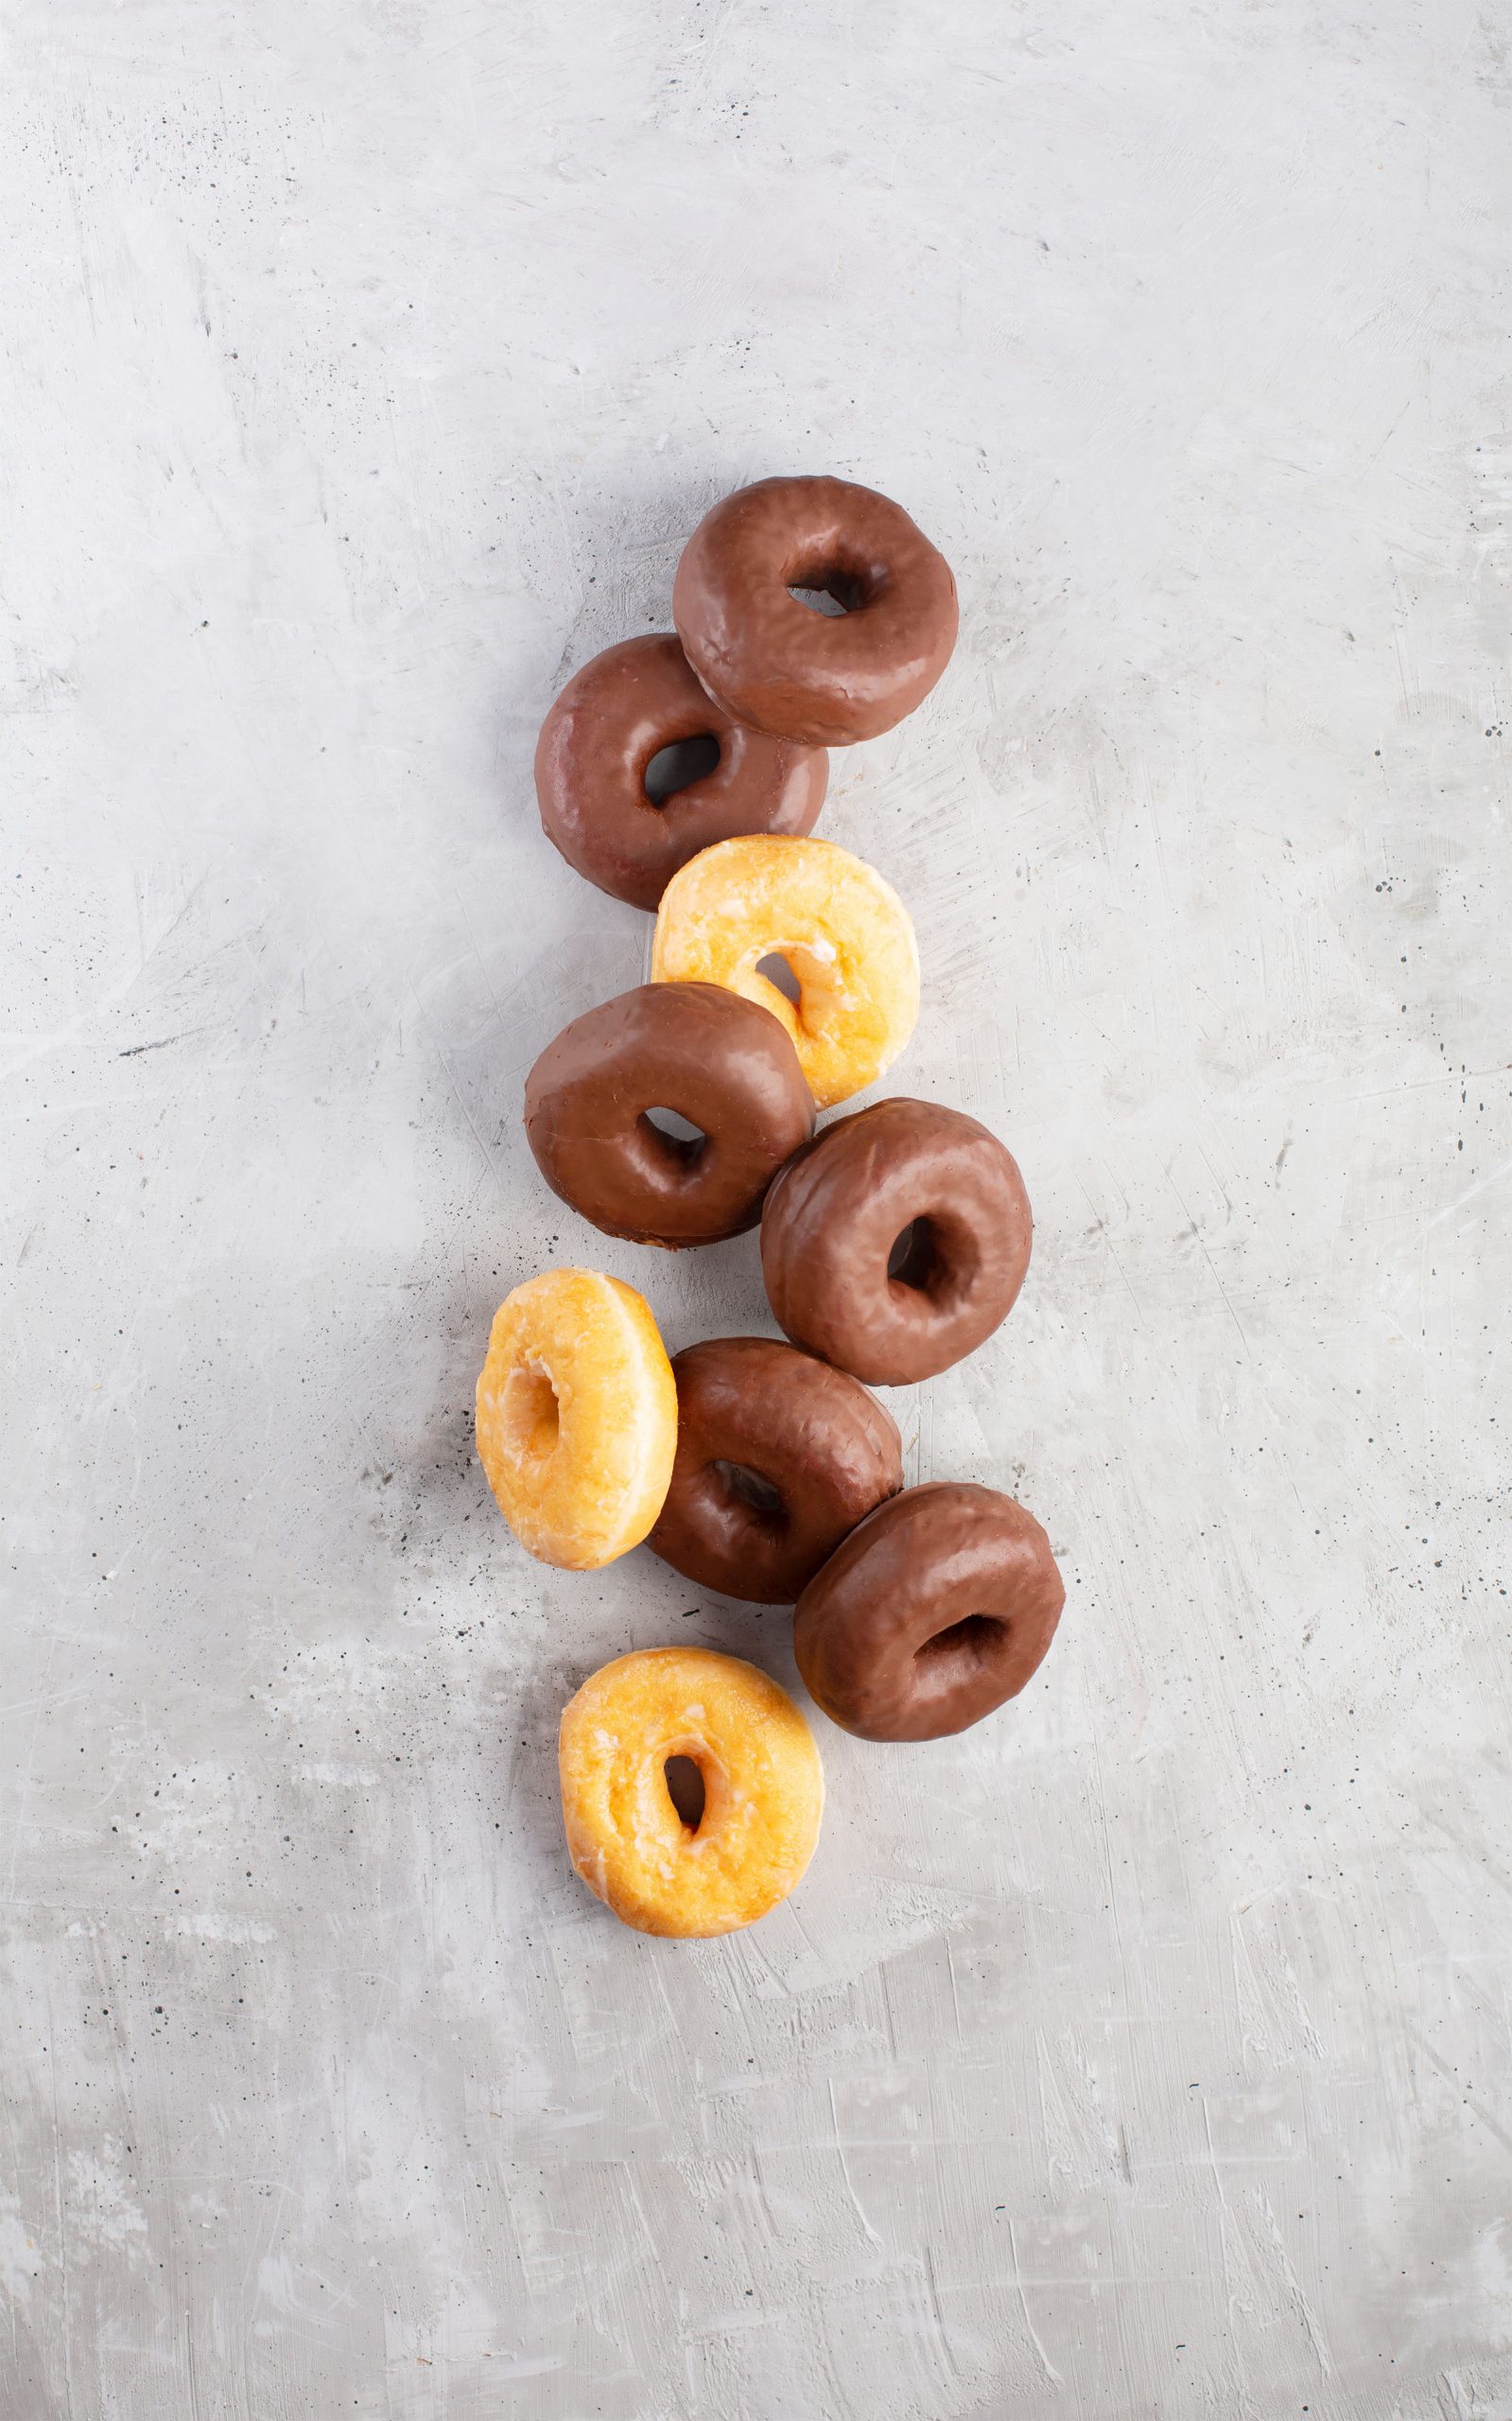 Group of glazed and chocolate donuts on gray background